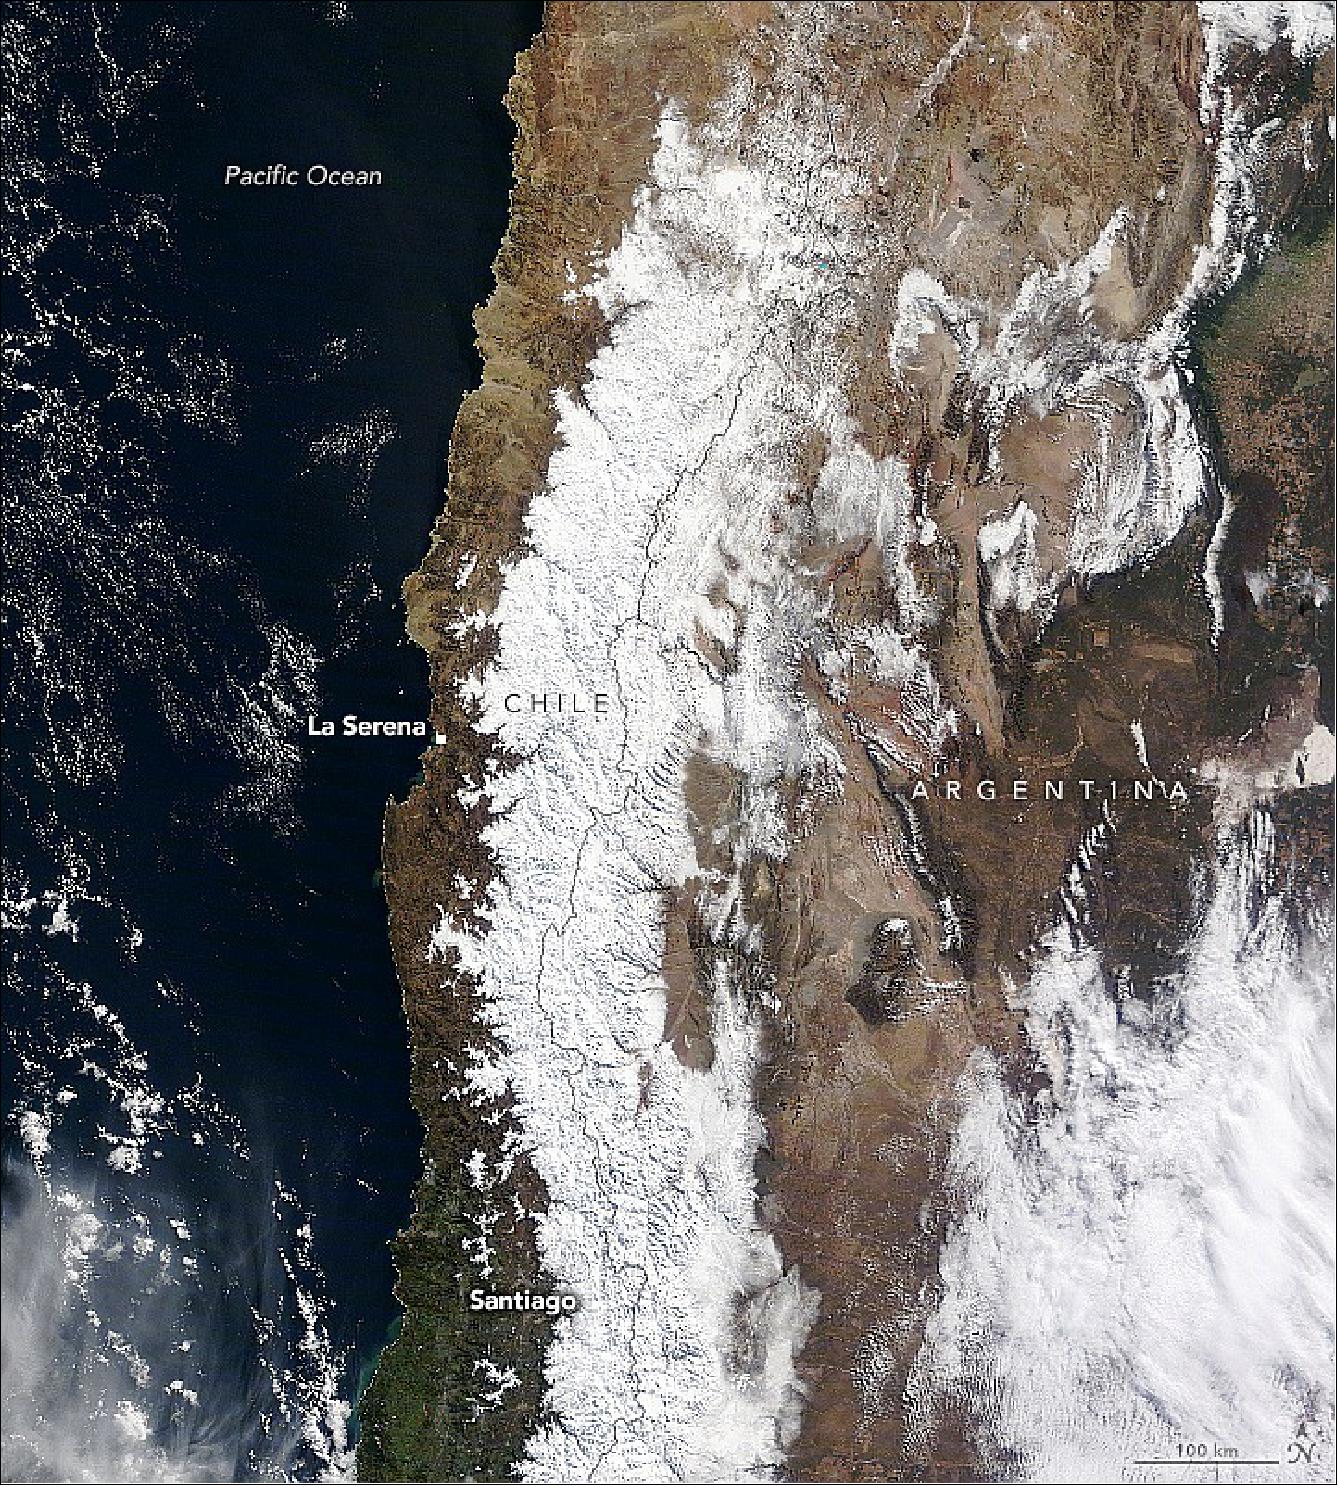 Figure 8: The blanket of fresh snow along the mountain range between Chile and Argentina is visible in the image above, acquired on July 16 by the MODIS instrument on NASA’s Terra satellite. Heavy rain and snow fell in the area despite La Niña conditions offshore in the Pacific that typically bring dry winters. The precipitation brought at least some temporary relief to an area suffering a decade-long drought (image credit: NASA Earth Observatory images by Joshua Stevens, using Landsat data from the U.S. Geological Survey and data from the Level-1 and Atmosphere Archive & Distribution System (LAADS) and Land Atmosphere Near real-time Capability for EOS (LANCE). Story by Kathryn Hansen)